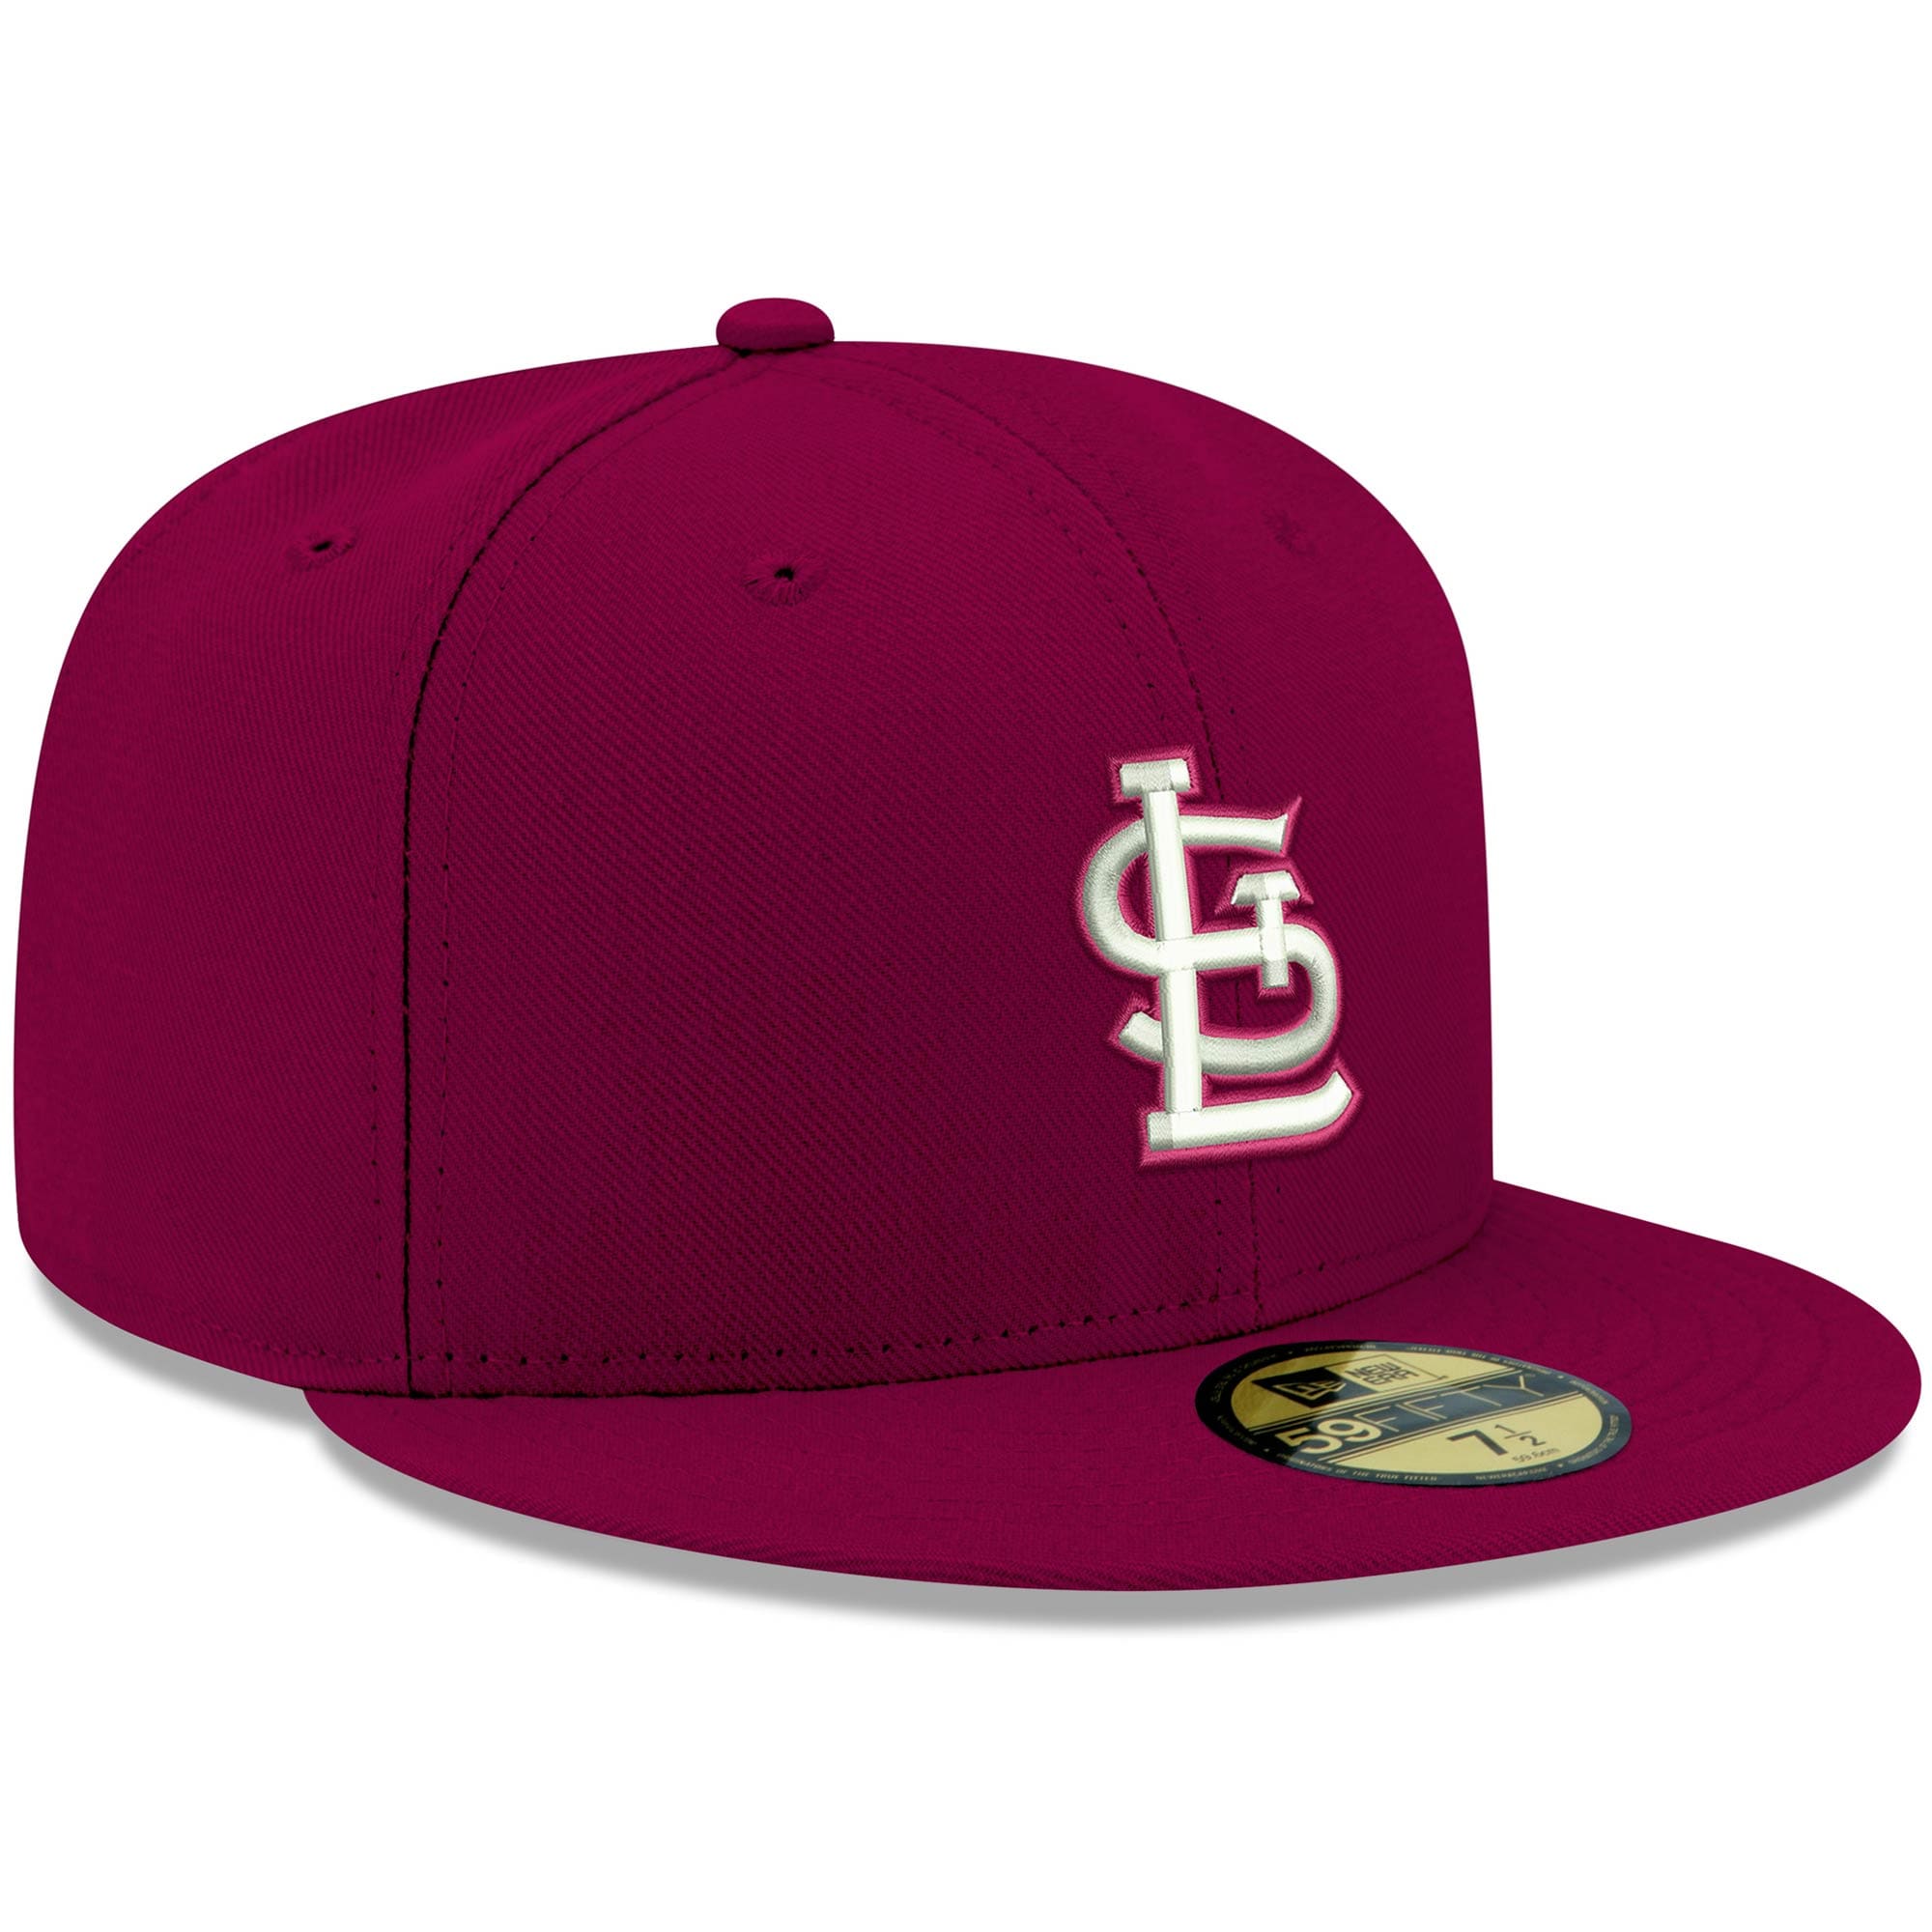 Men's New Era Cardinal St. Louis Cardinals White Logo 59FIFTY Fitted Hat - image 3 of 5